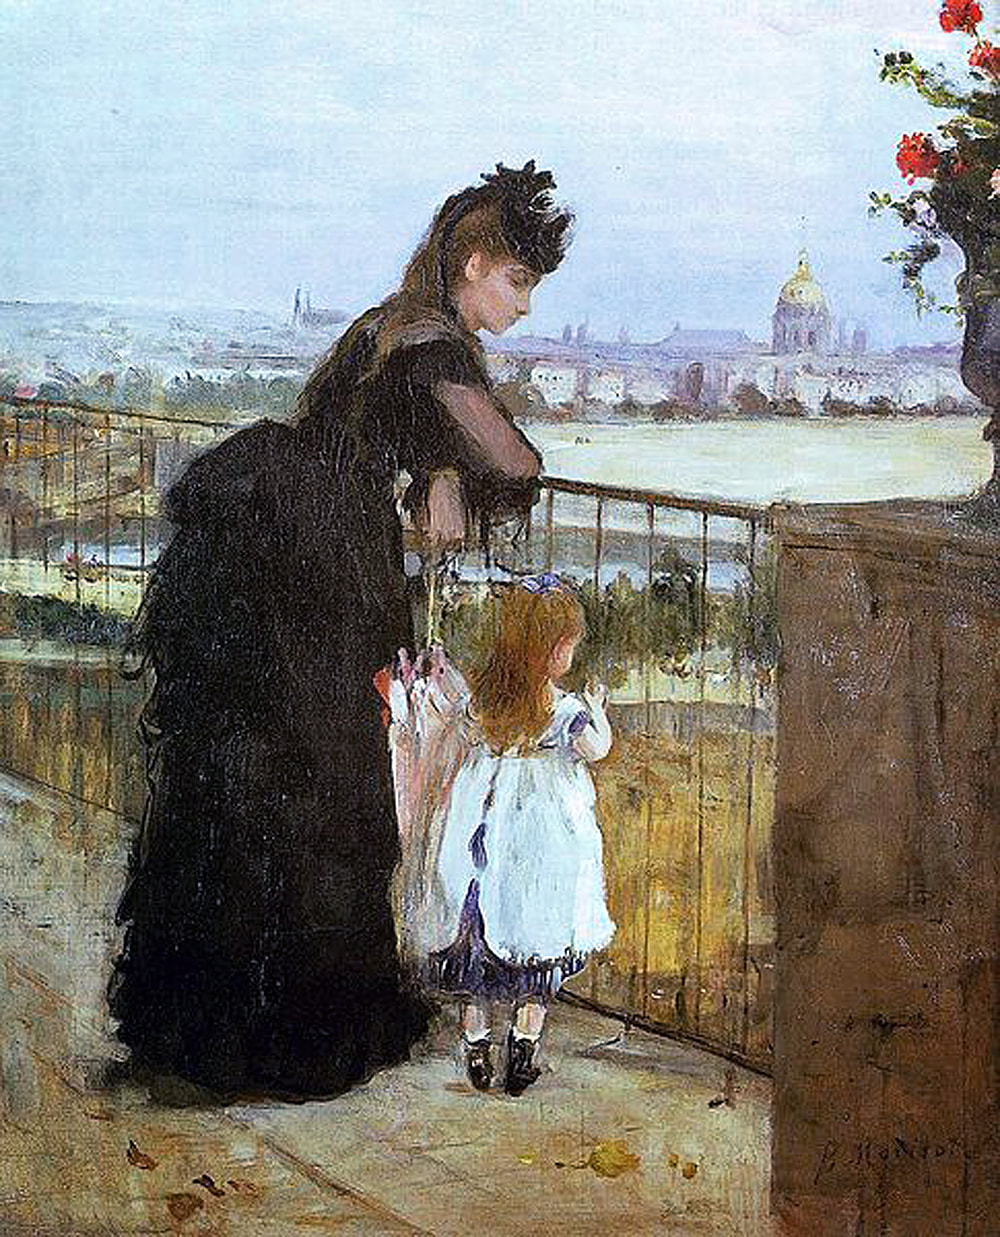 Painting by Berthe Morisot